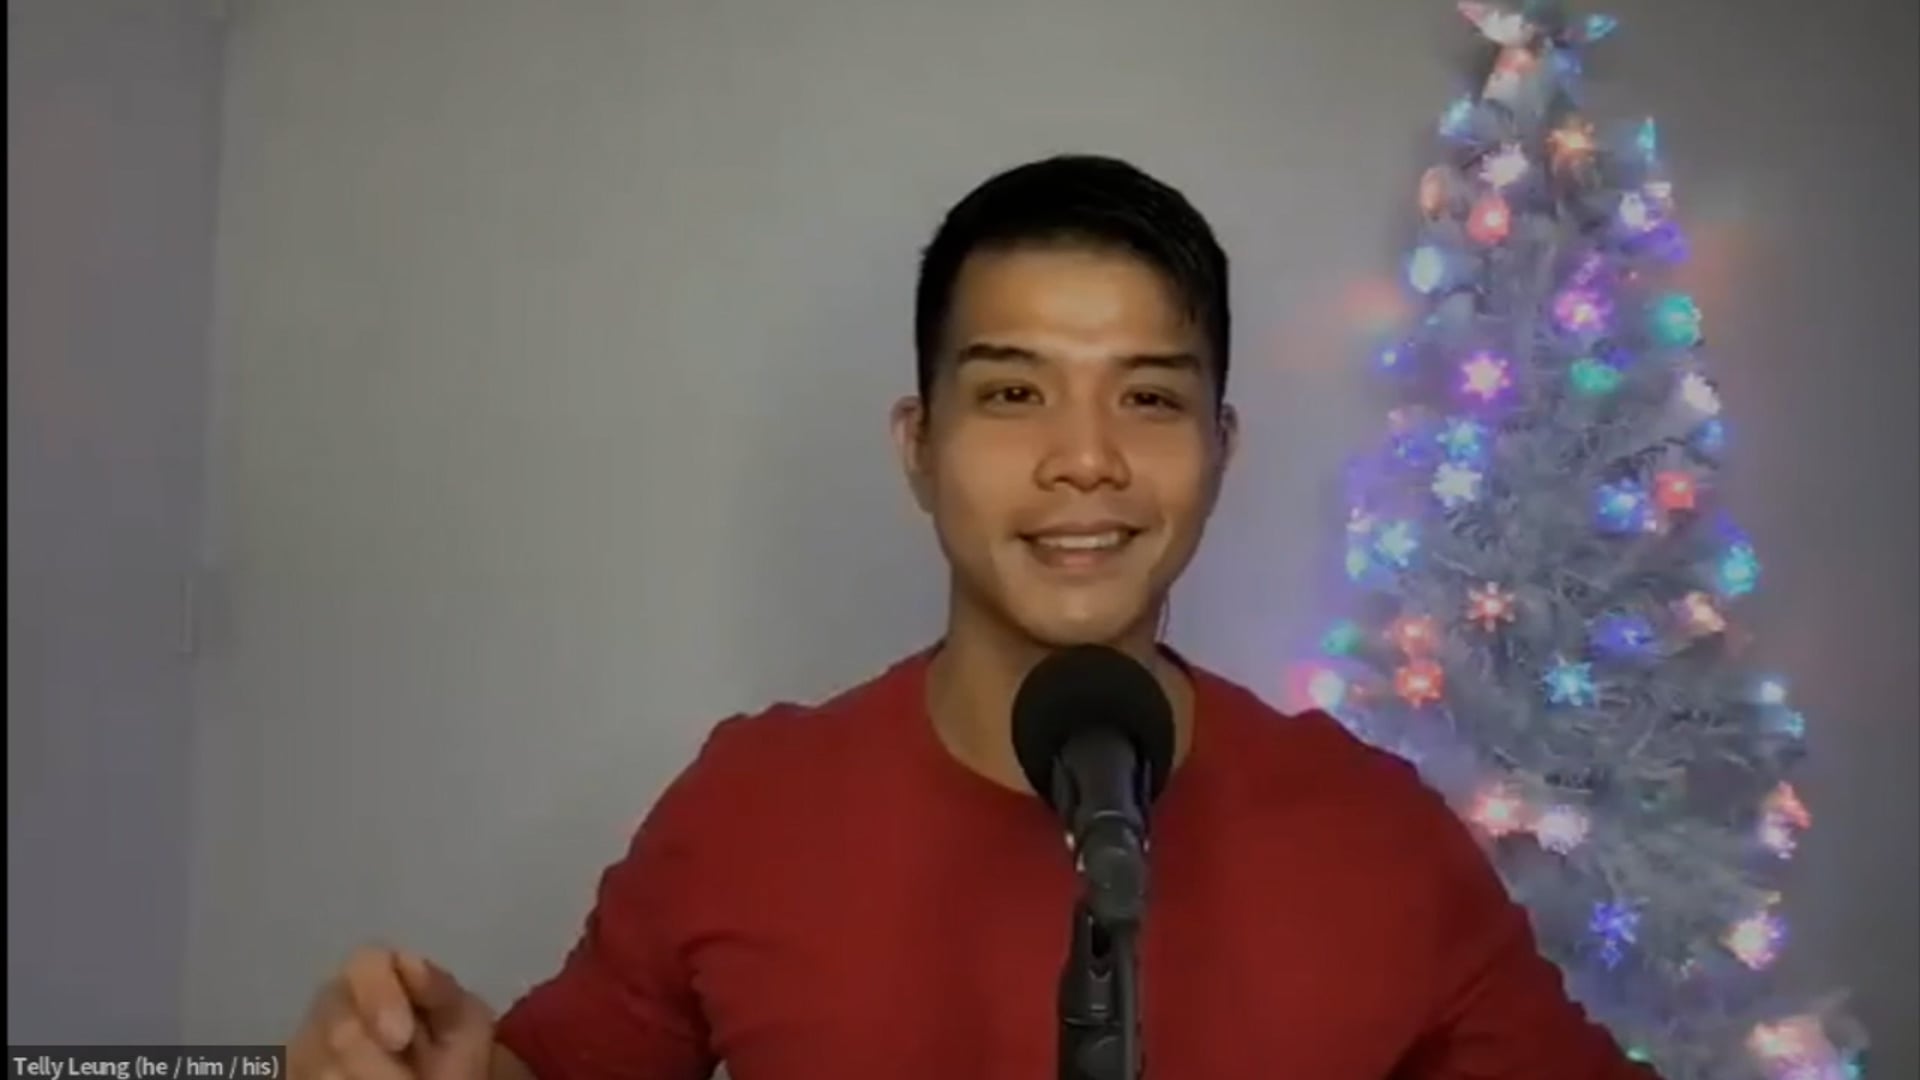 The Most Wonderful Time of The Year - Telly Leung